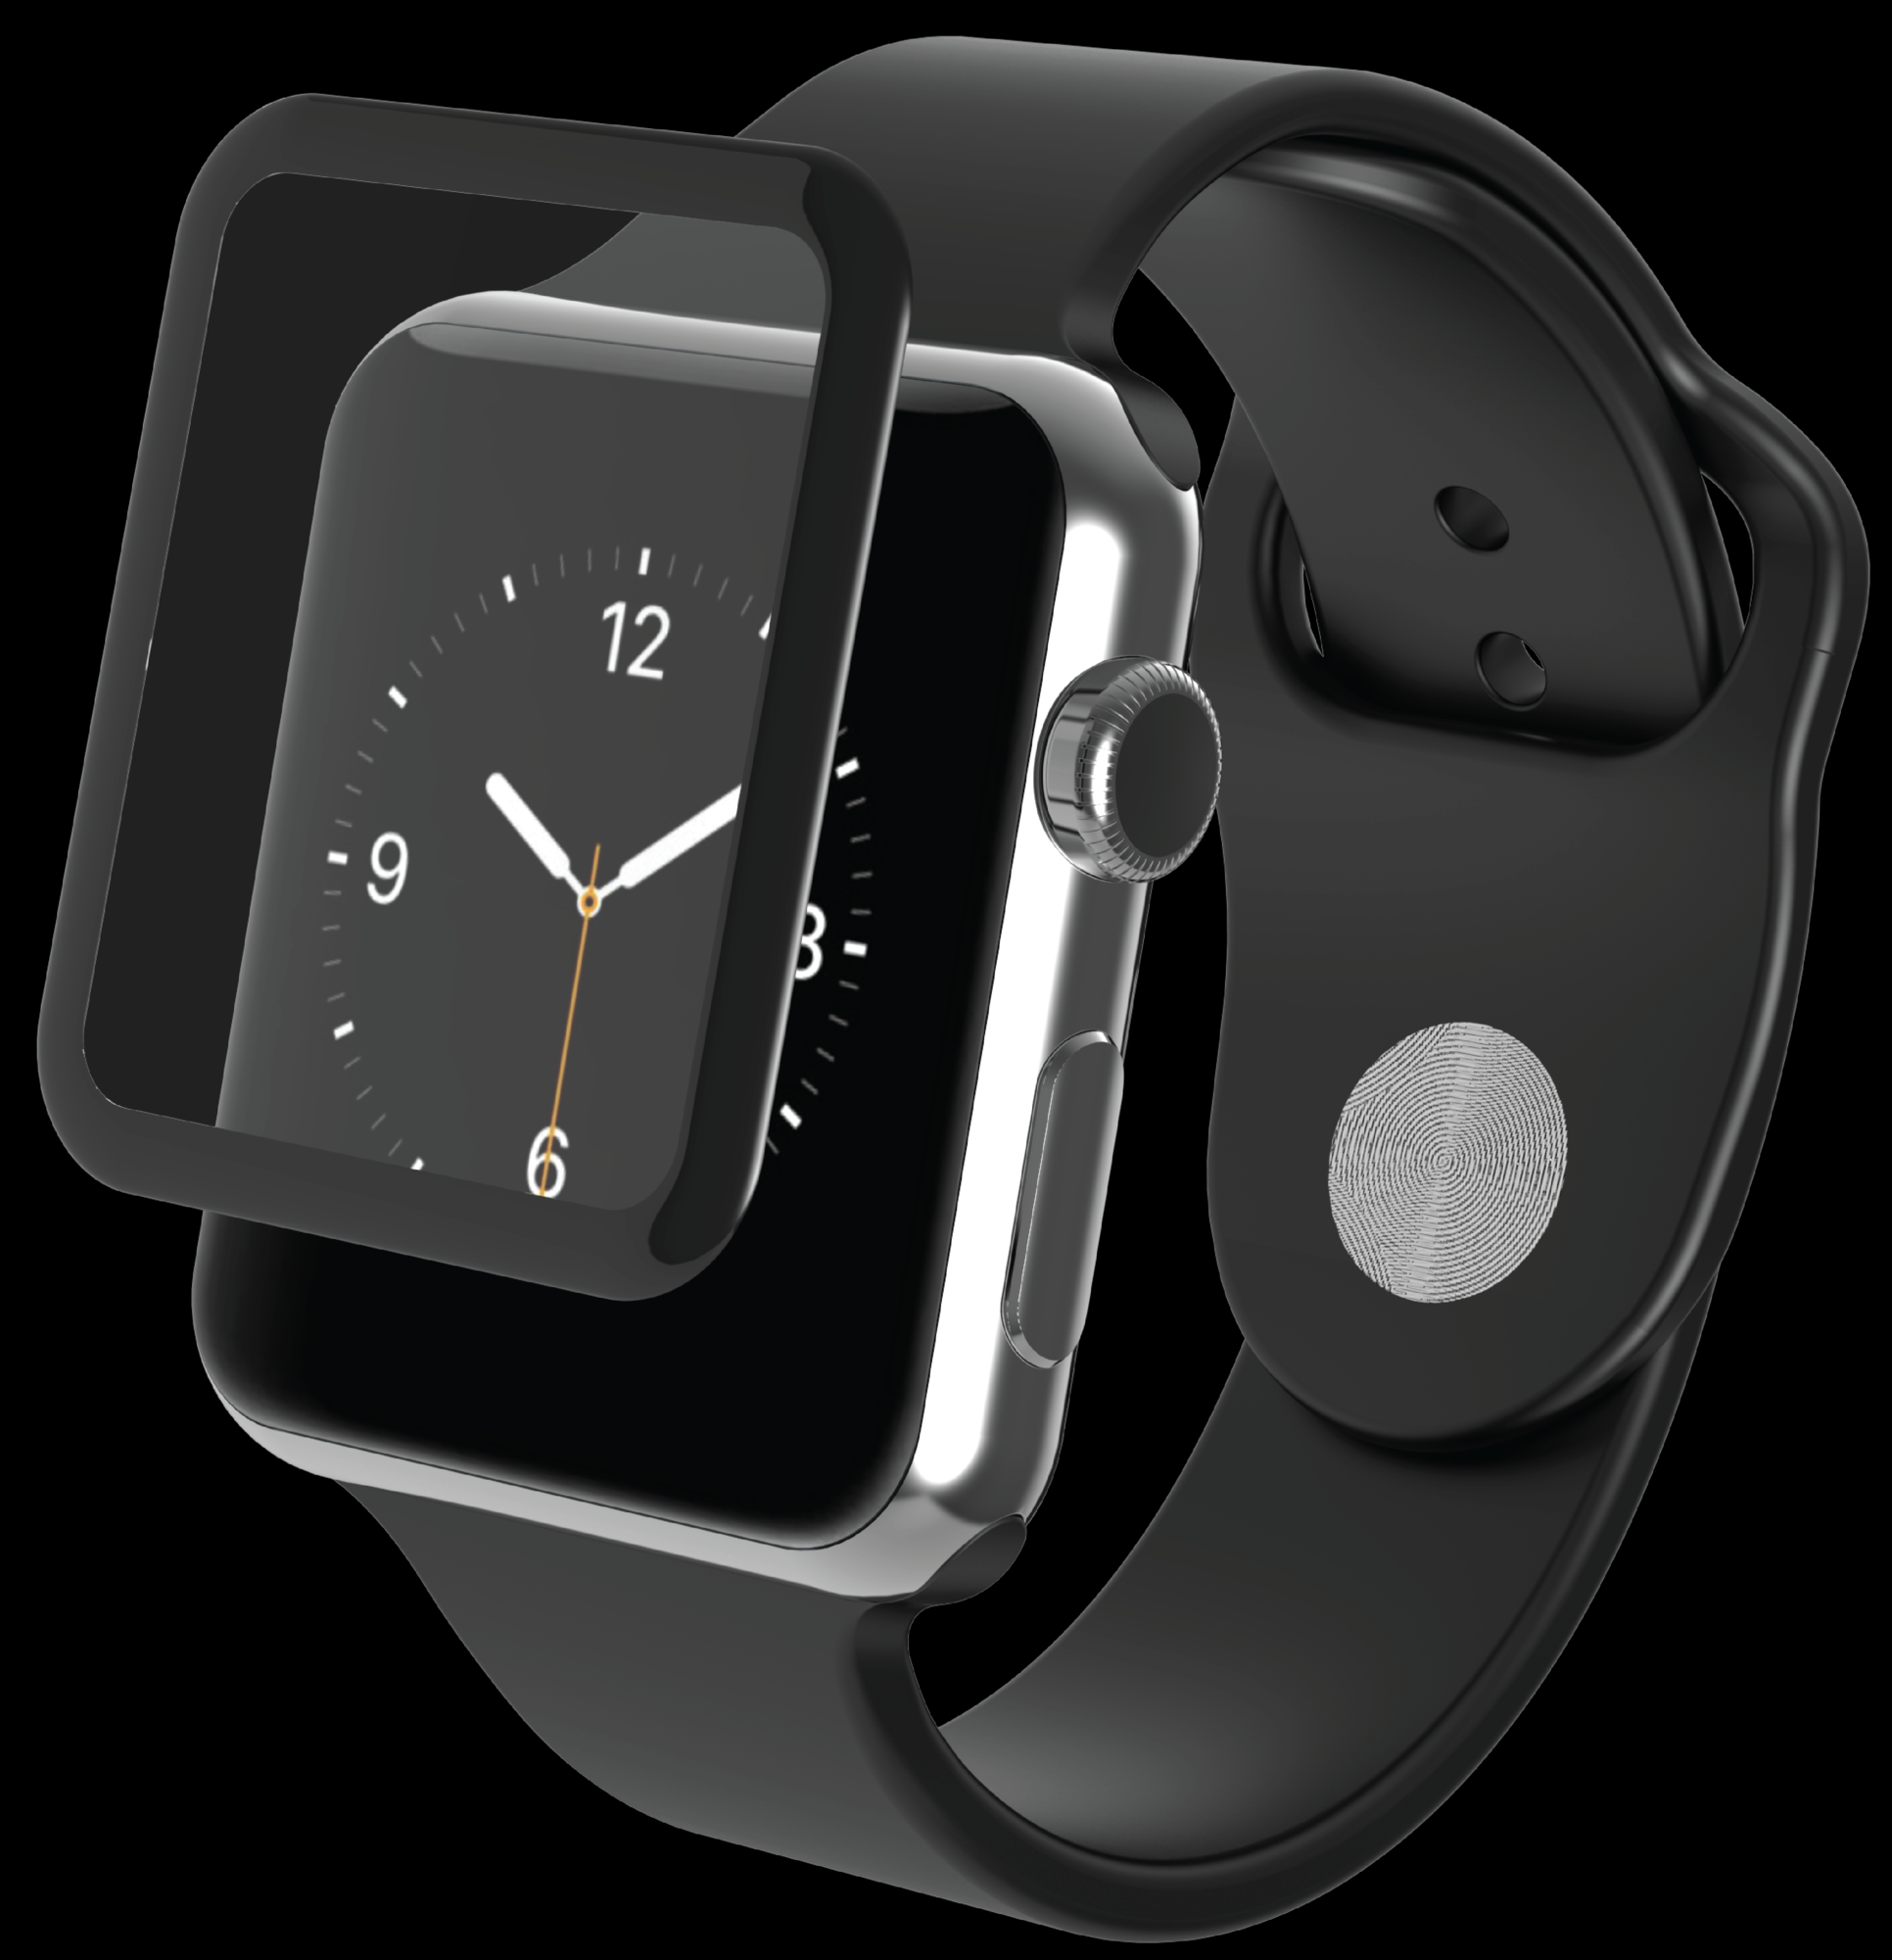 InvisibleShield for Apple Watch 38MM, $14.99